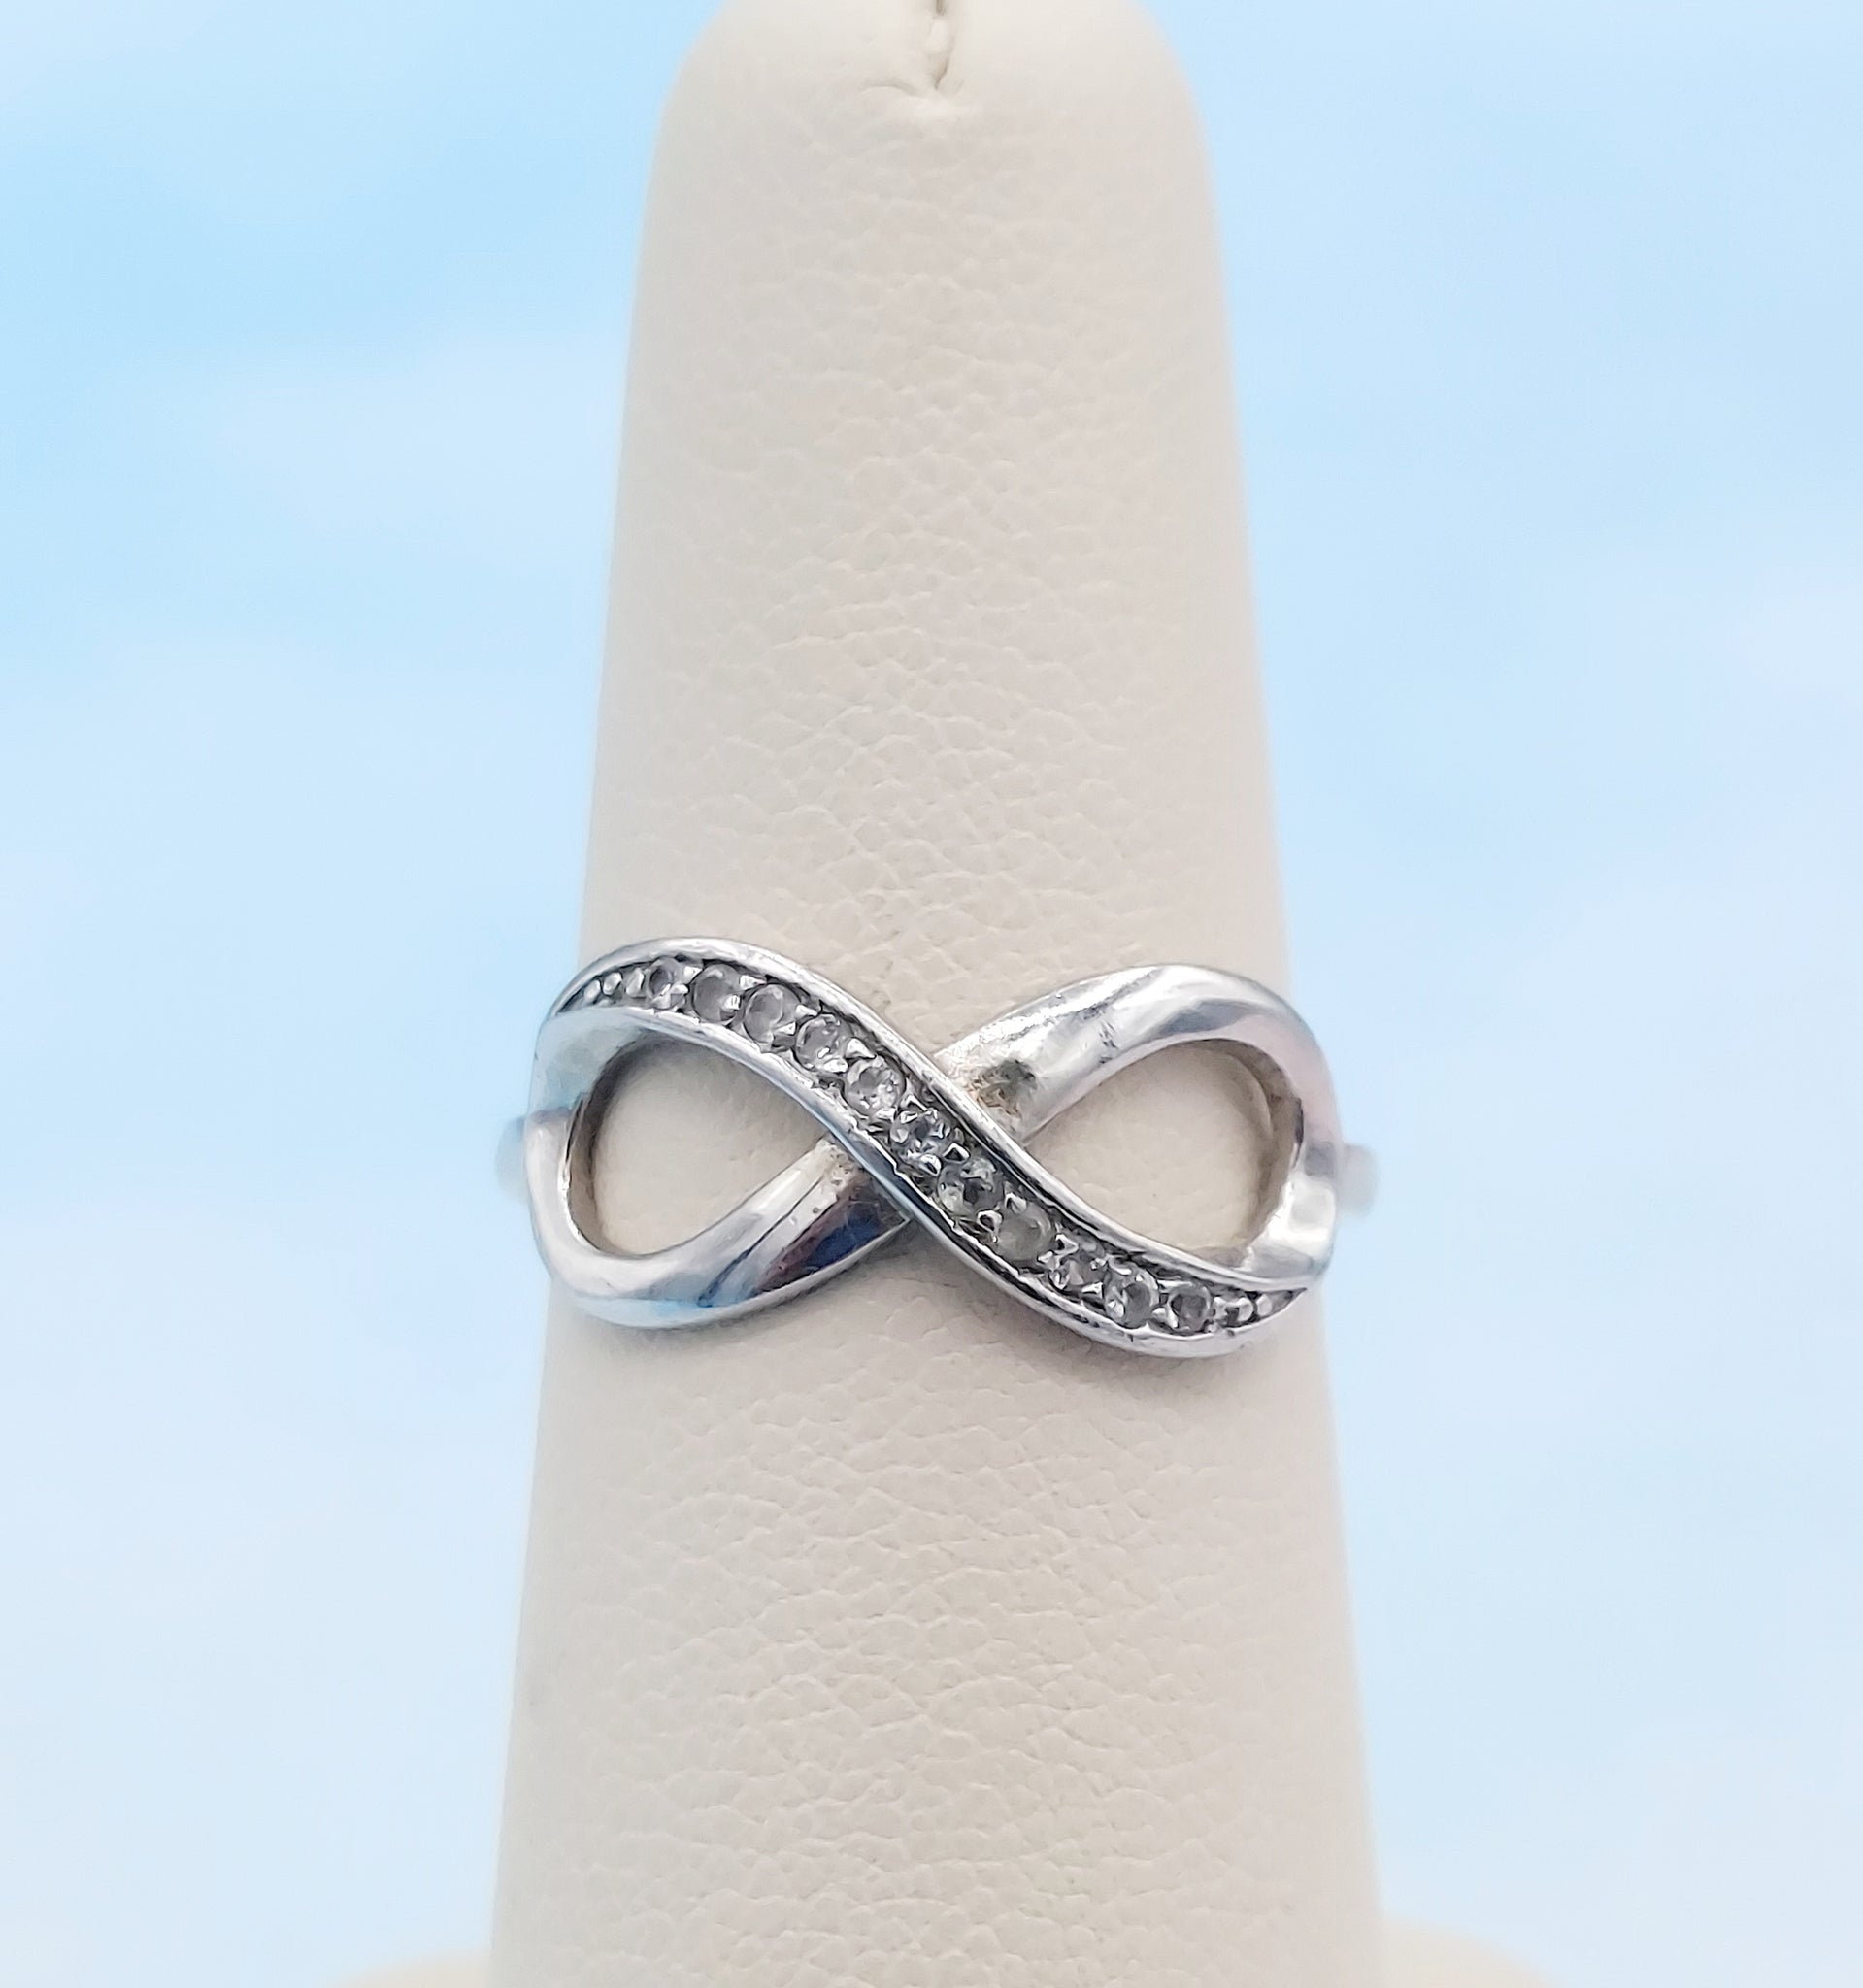 Buy Open Infinity Ring Sterling Silver Sideways Infinity Ring, Adjustable  Double Infinity, Couples Ring in Sterling Silver Online in India - Etsy